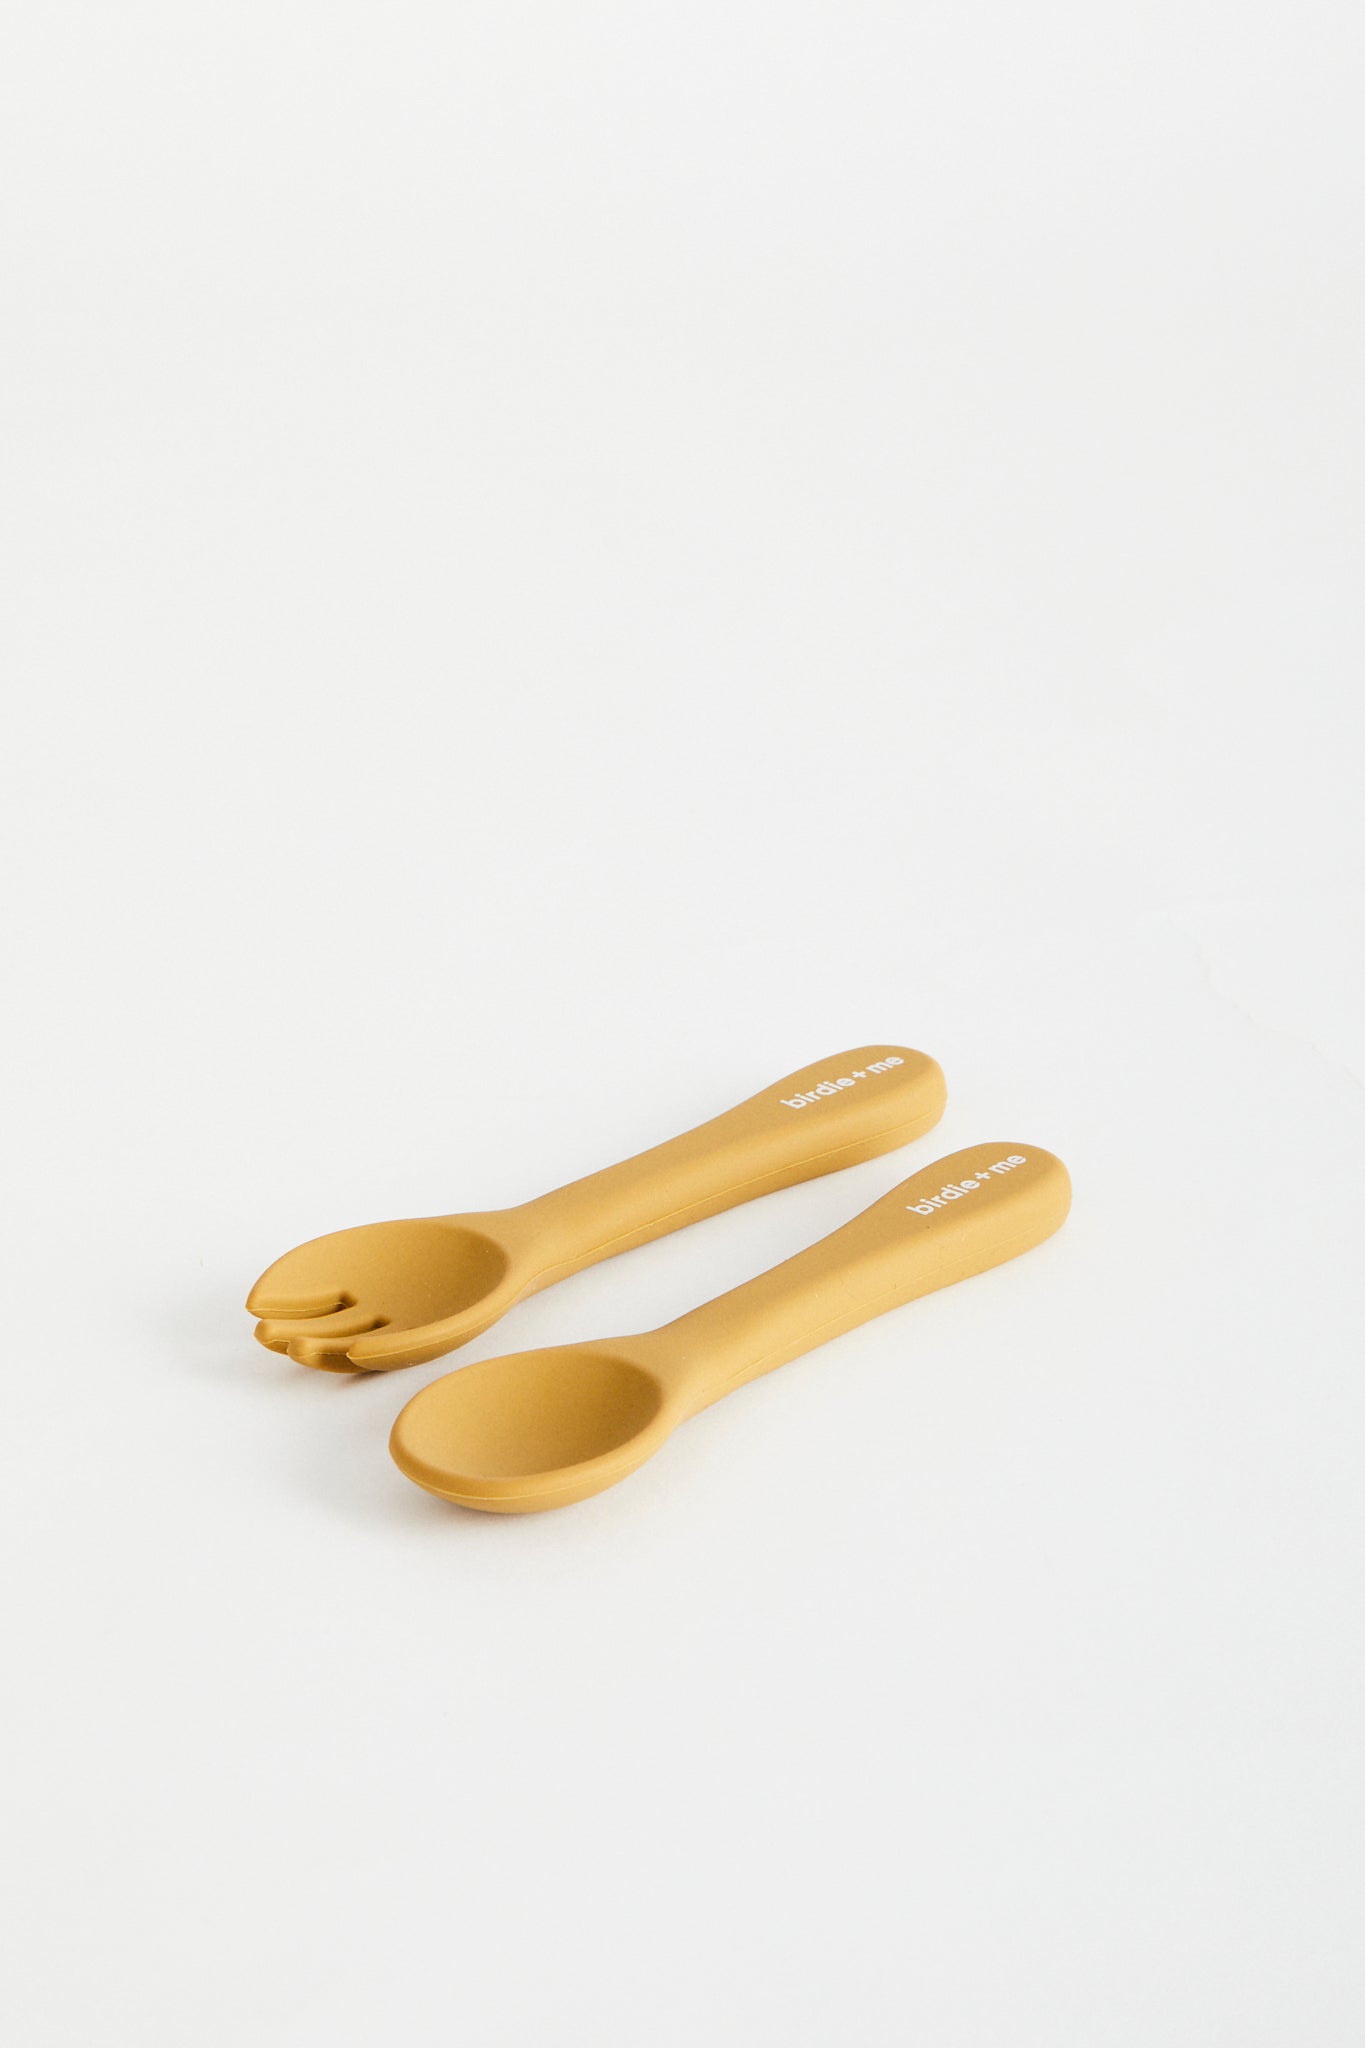 Silicon spoon & fork set in Clay, birdie + me logo on handle.